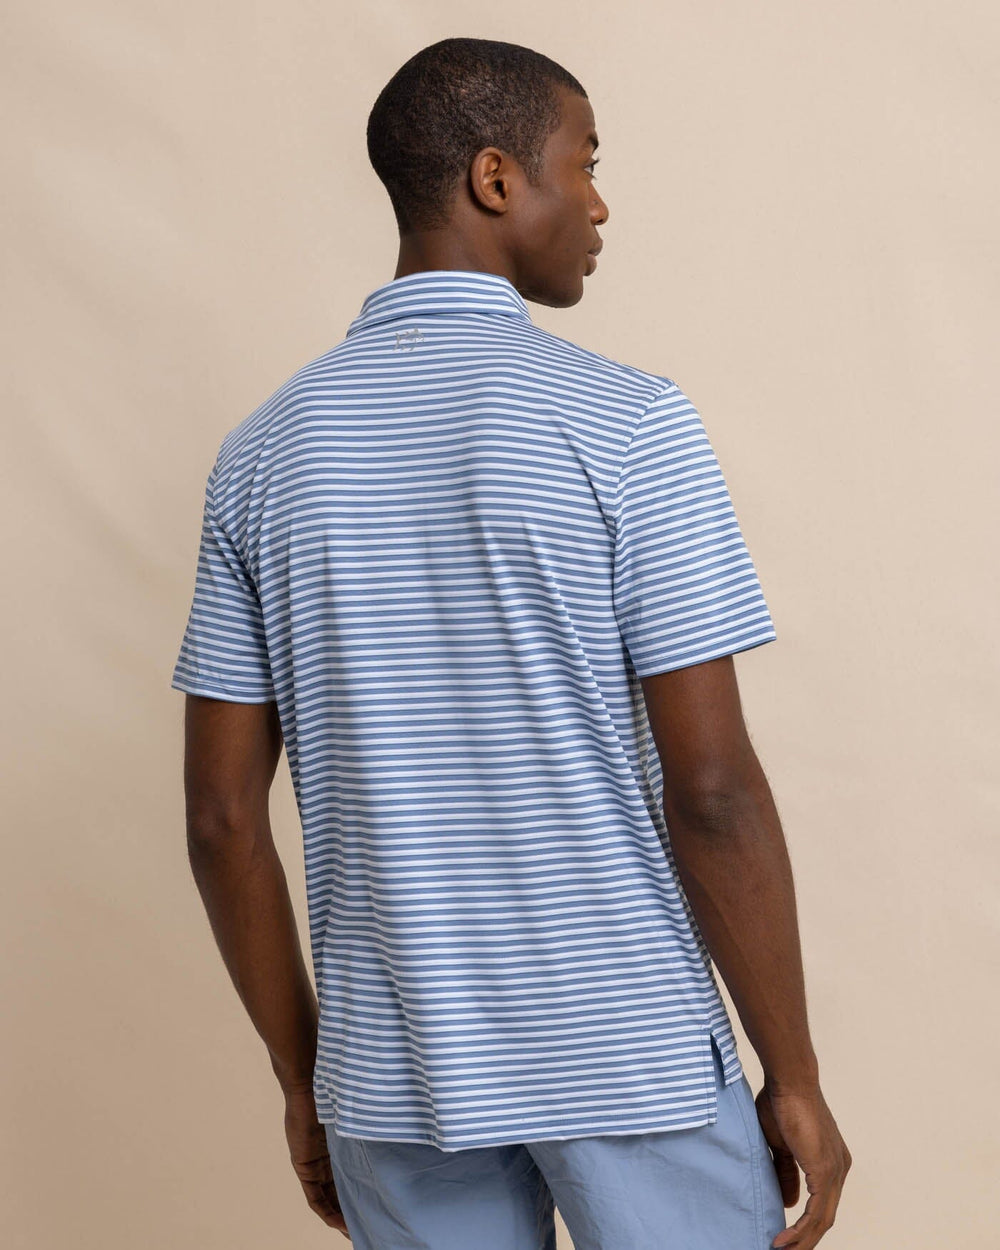 The back view of the Southern Tide Driver Carova Stripe Polo Shirt by Southern Tide - Coronet Blue